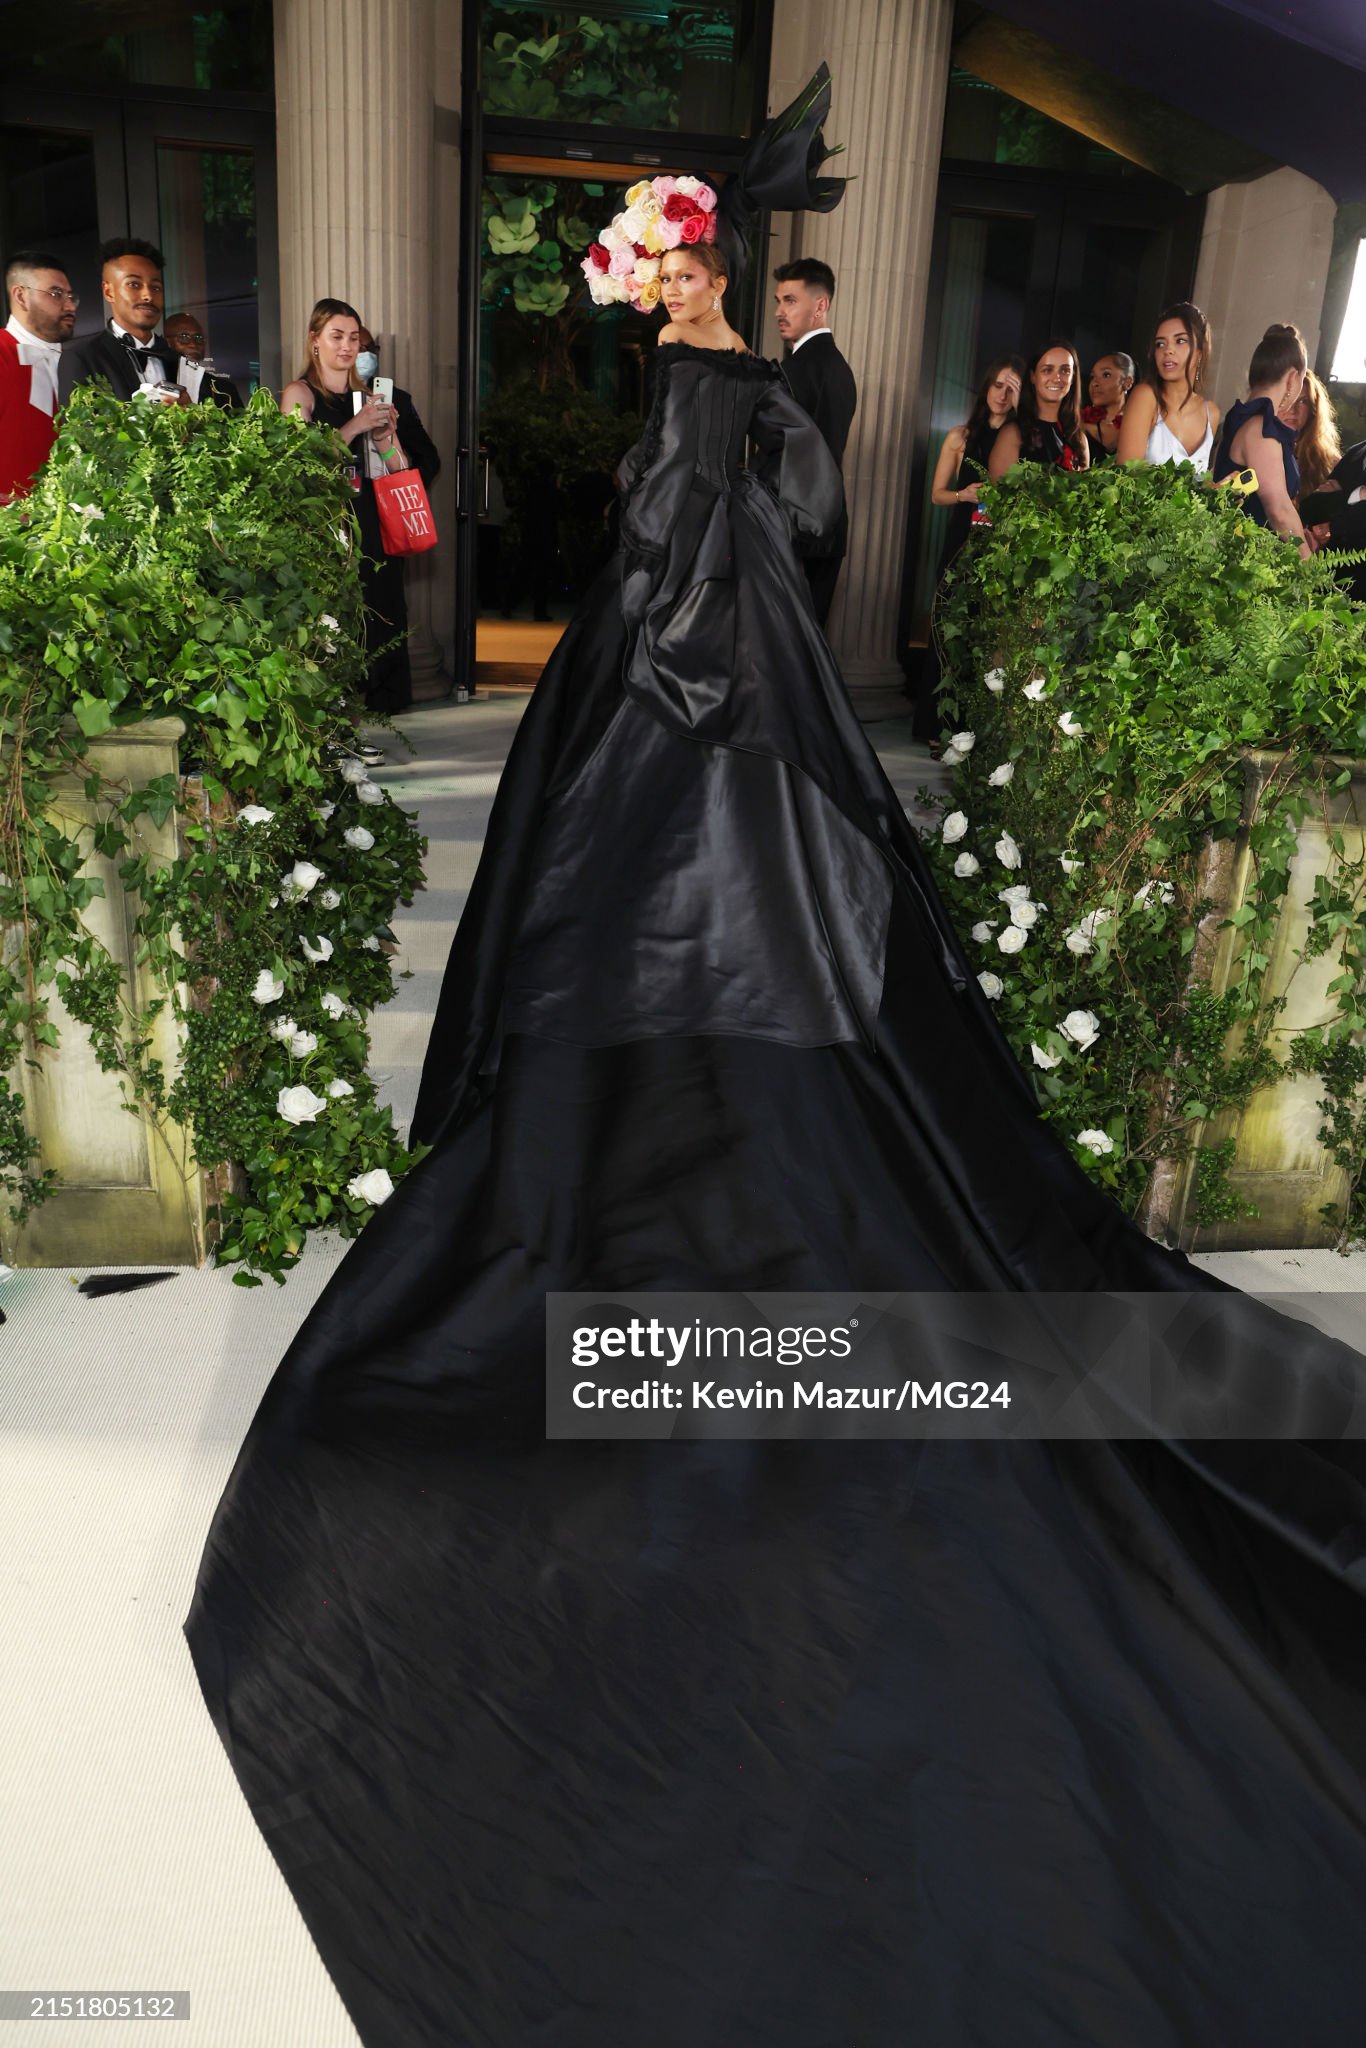 gettyimages-2151805132-2048x2048.jpg